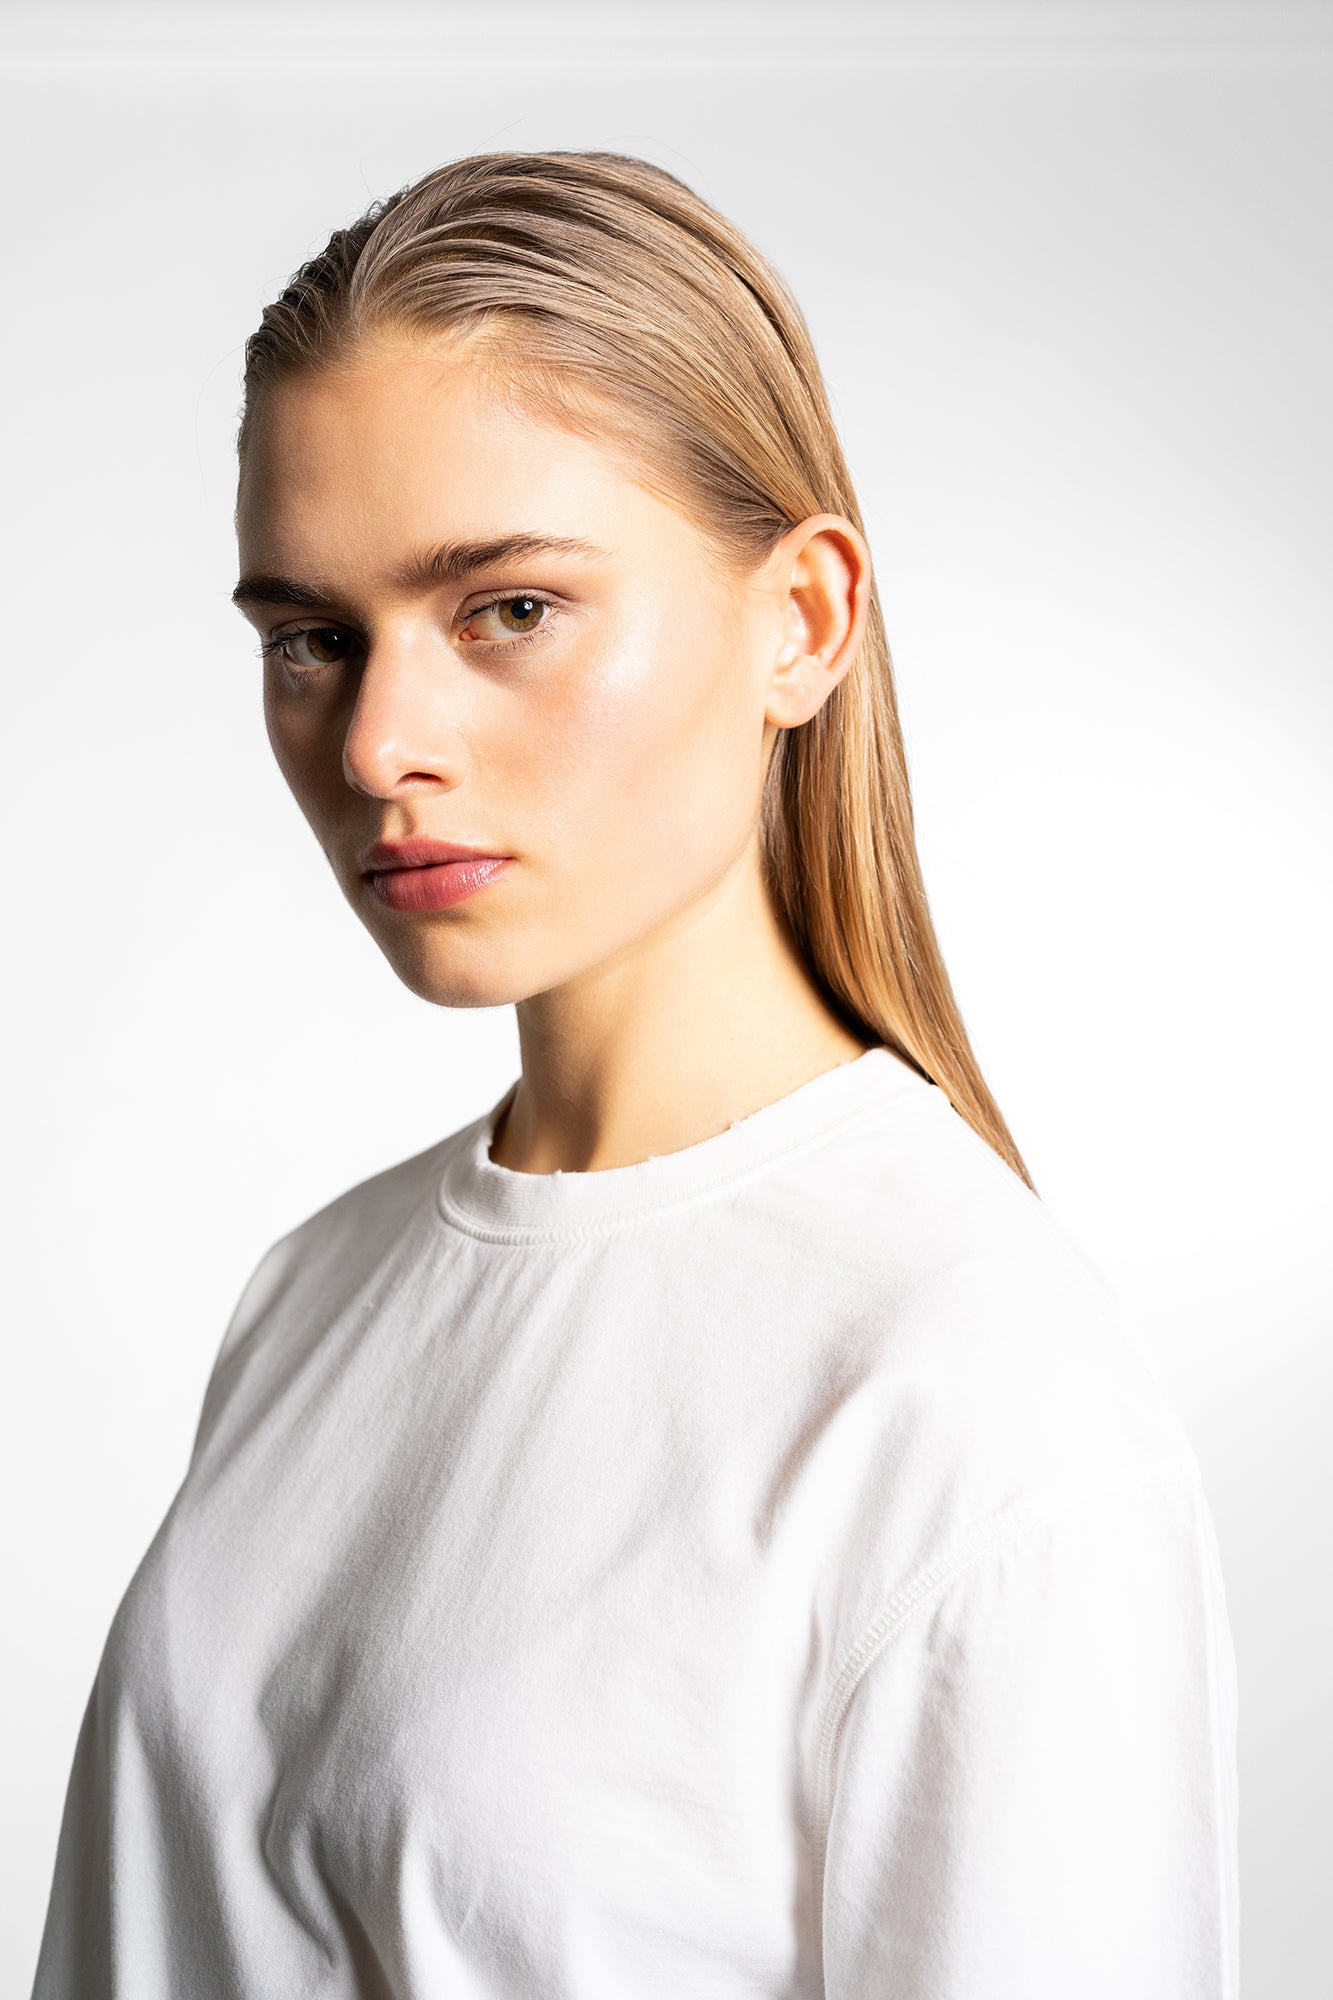 T-Shirt Zoey in offwhite by VIVAL.STUDIO